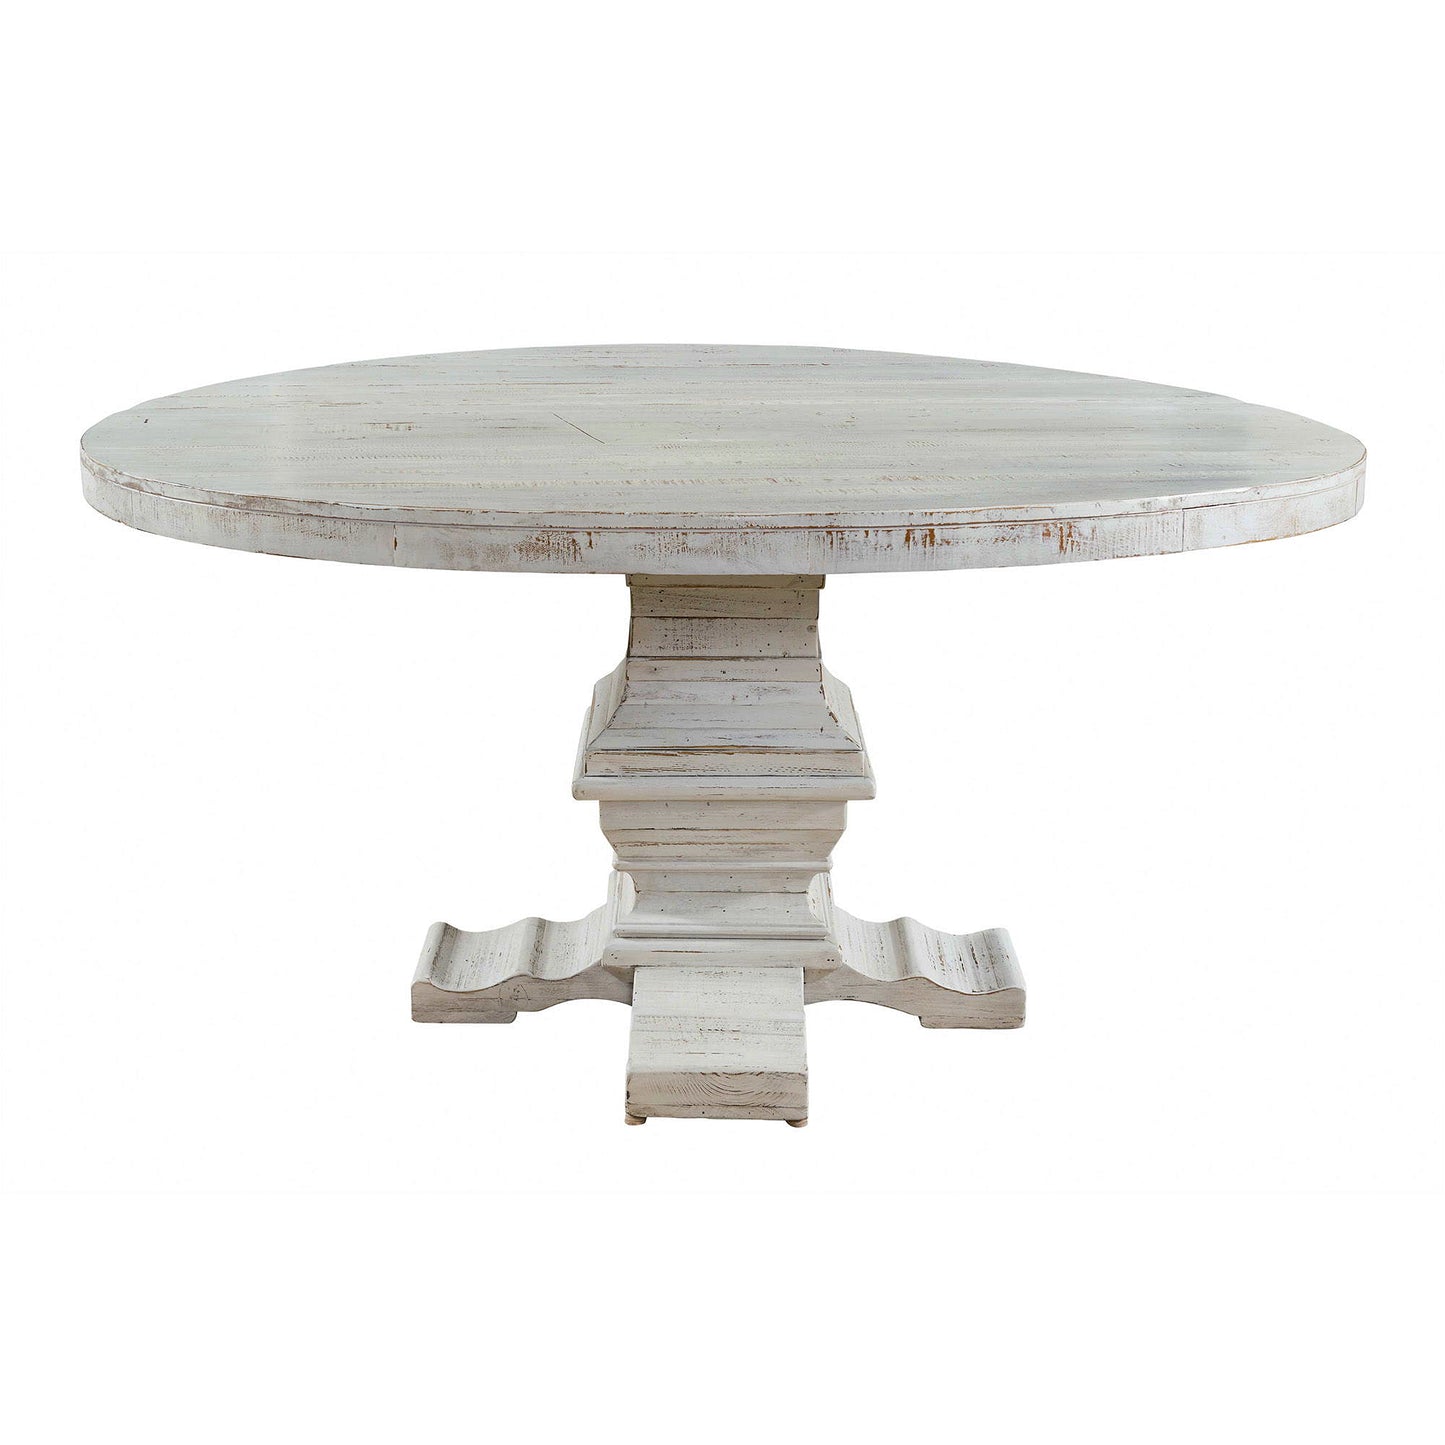 Condesa - White Round Dining Table - Distressed White Finish